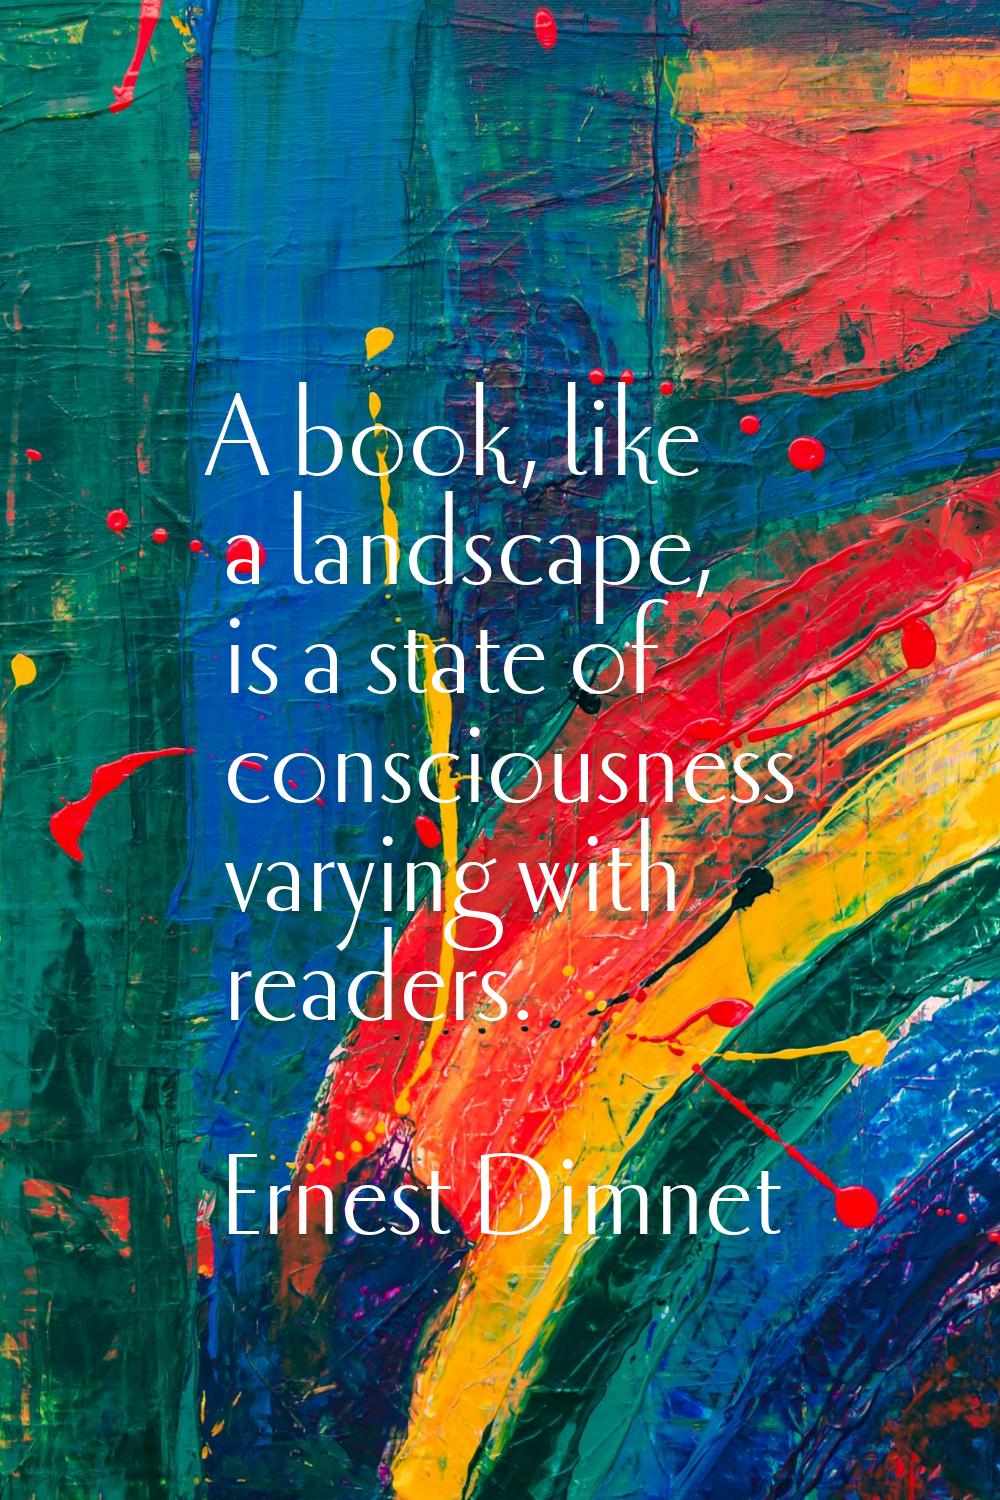 A book, like a landscape, is a state of consciousness varying with readers.